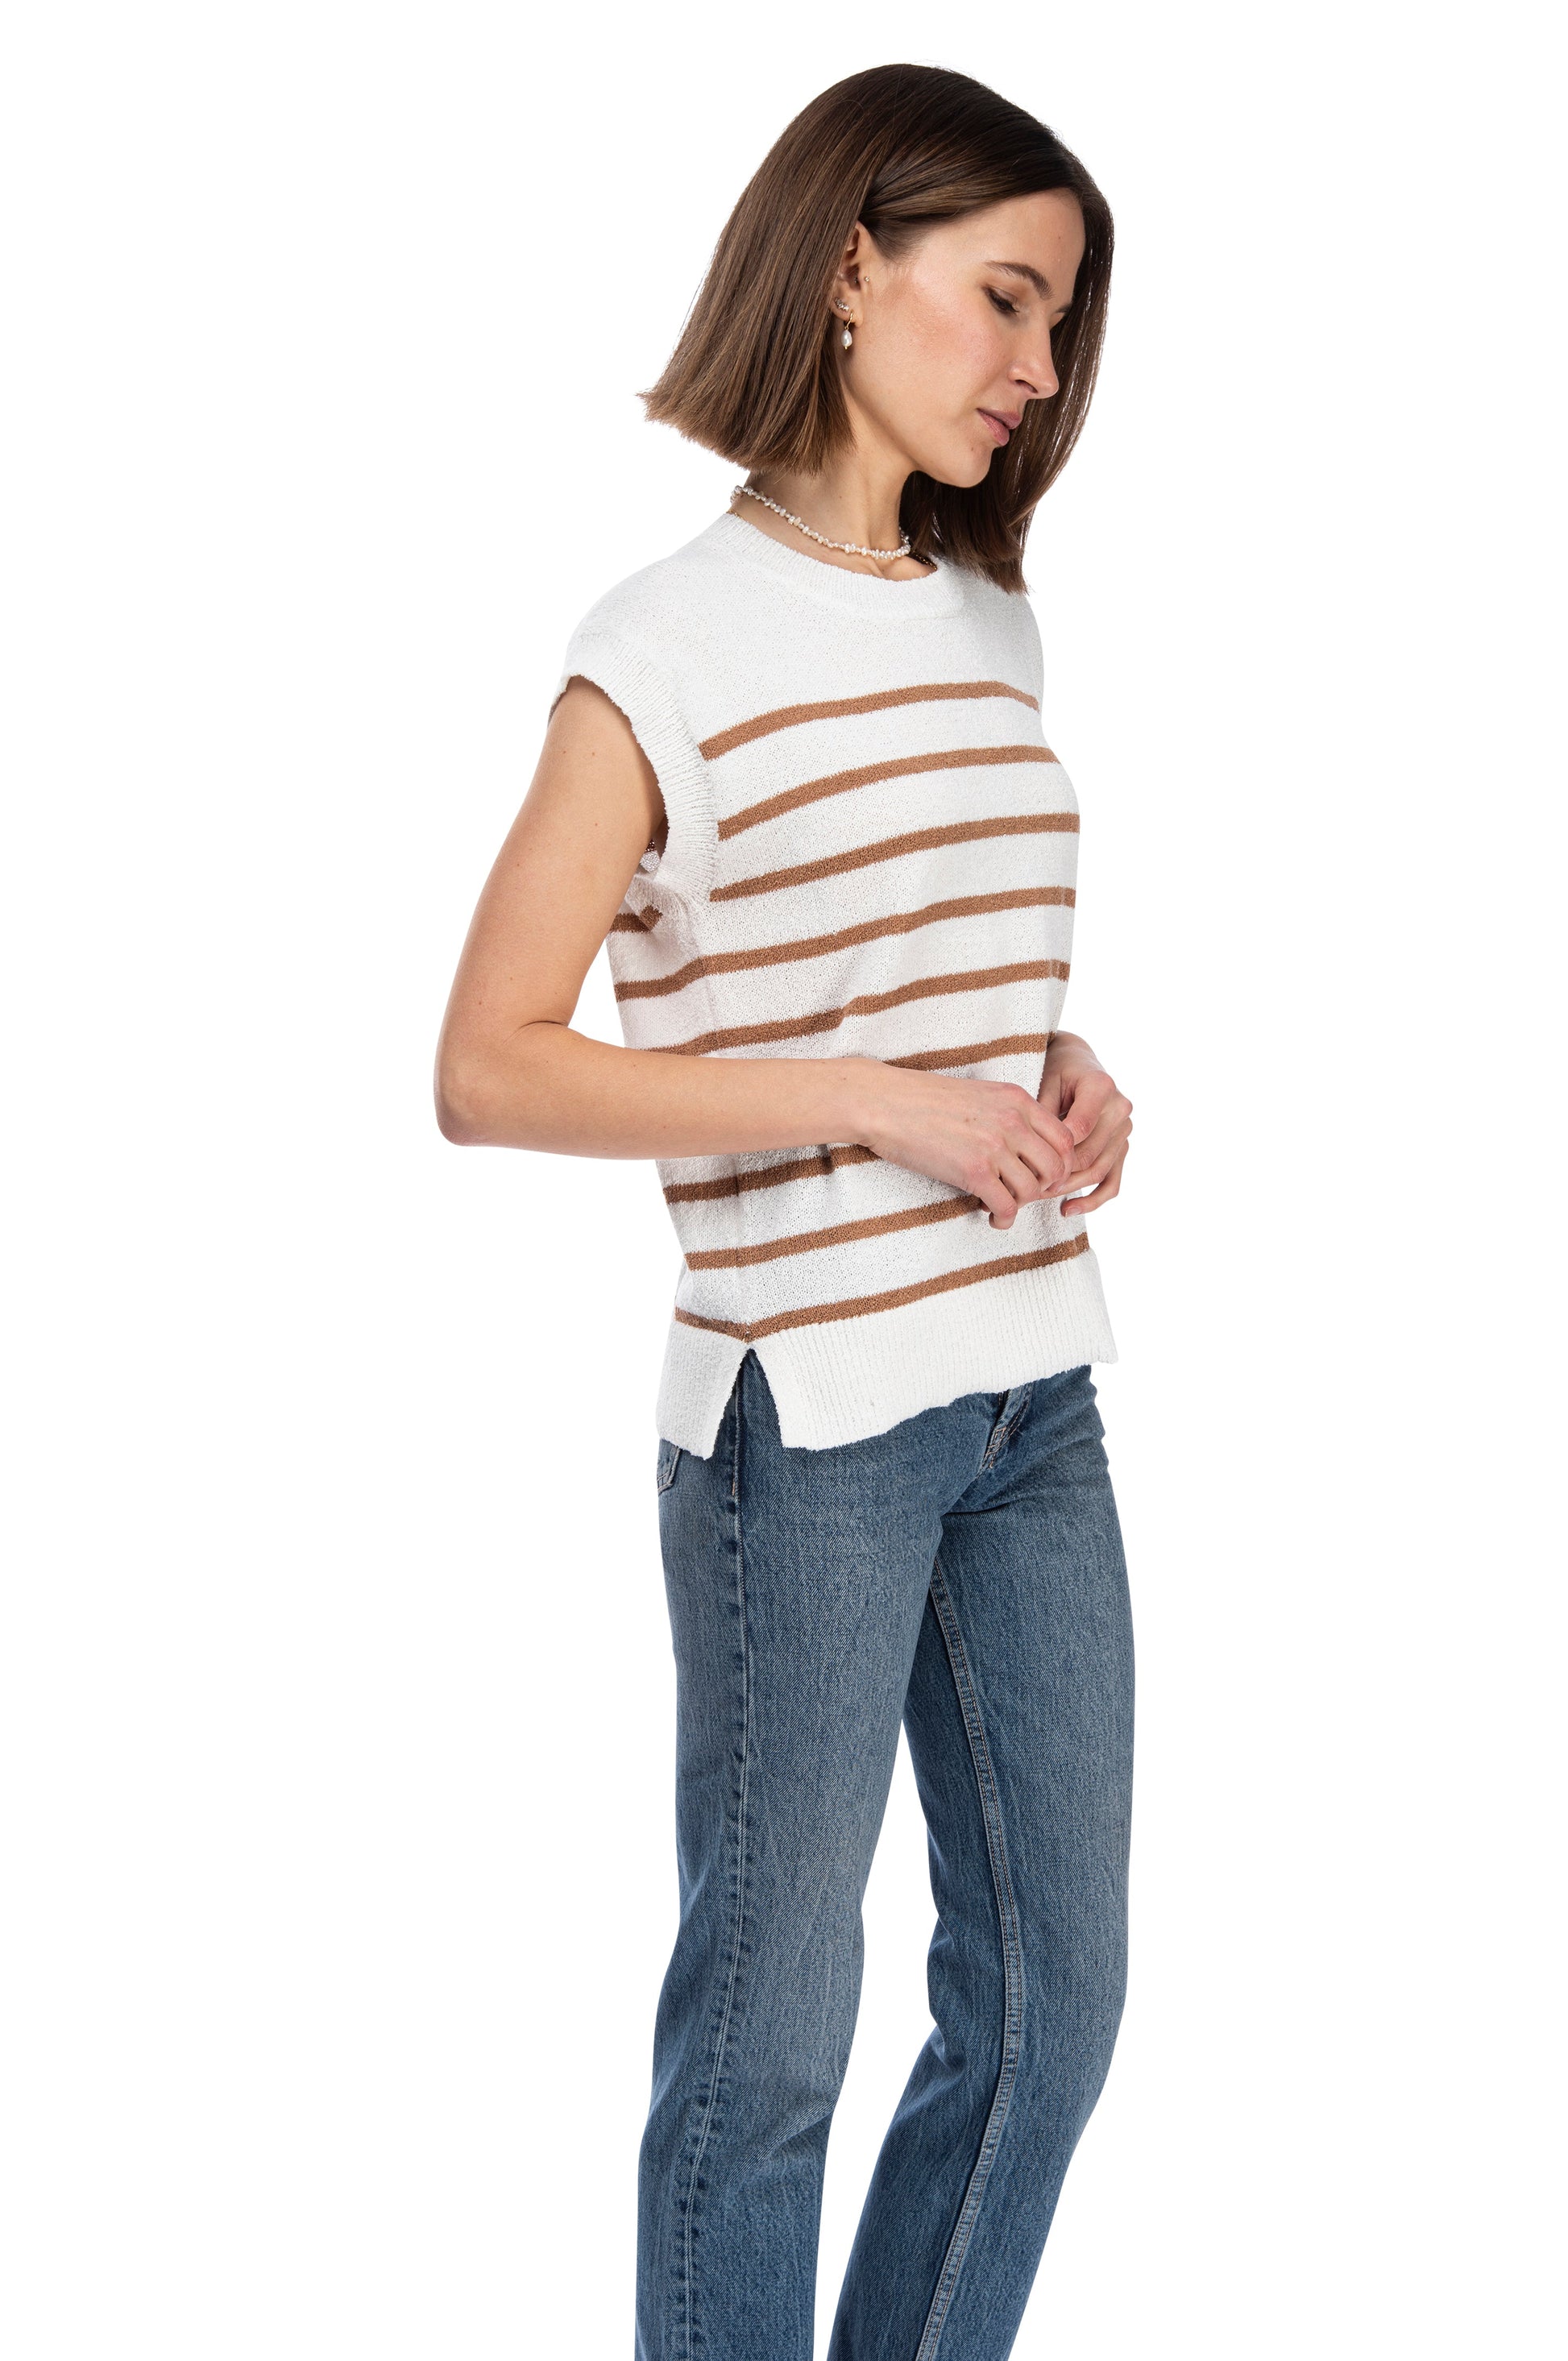 A woman in a B Collection by Bobeau CREW NECK STRIPE SWEATER TOP and jeans standing against a white background, looking down to her right with a mild, thoughtful expression.